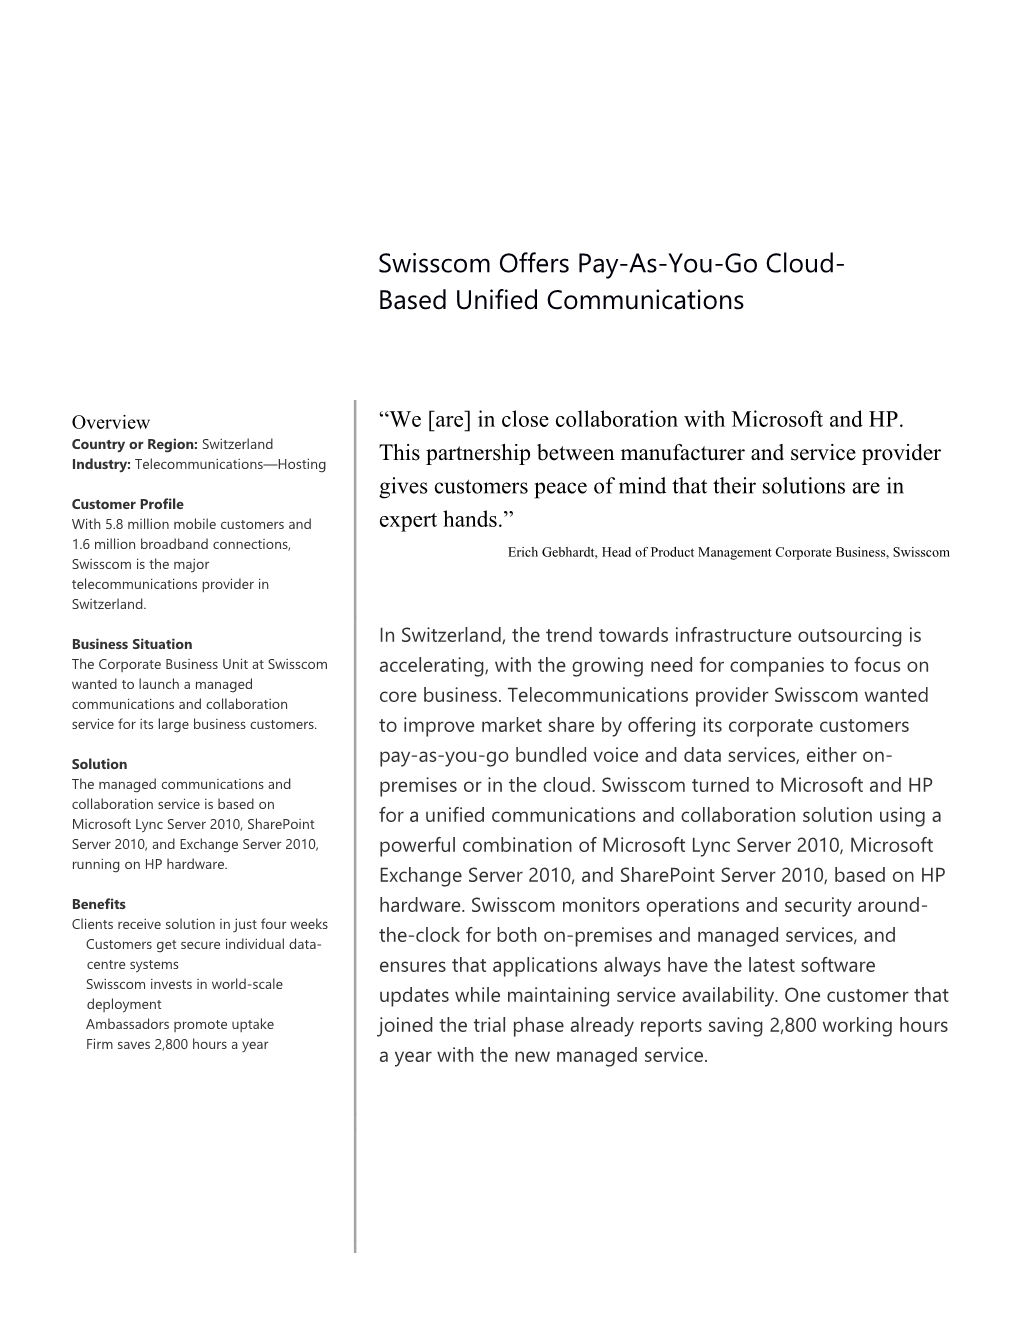 Metia CEP Swisscom Offers Pay-As-You-Go Cloud-Based Unified Communications and Collaboration